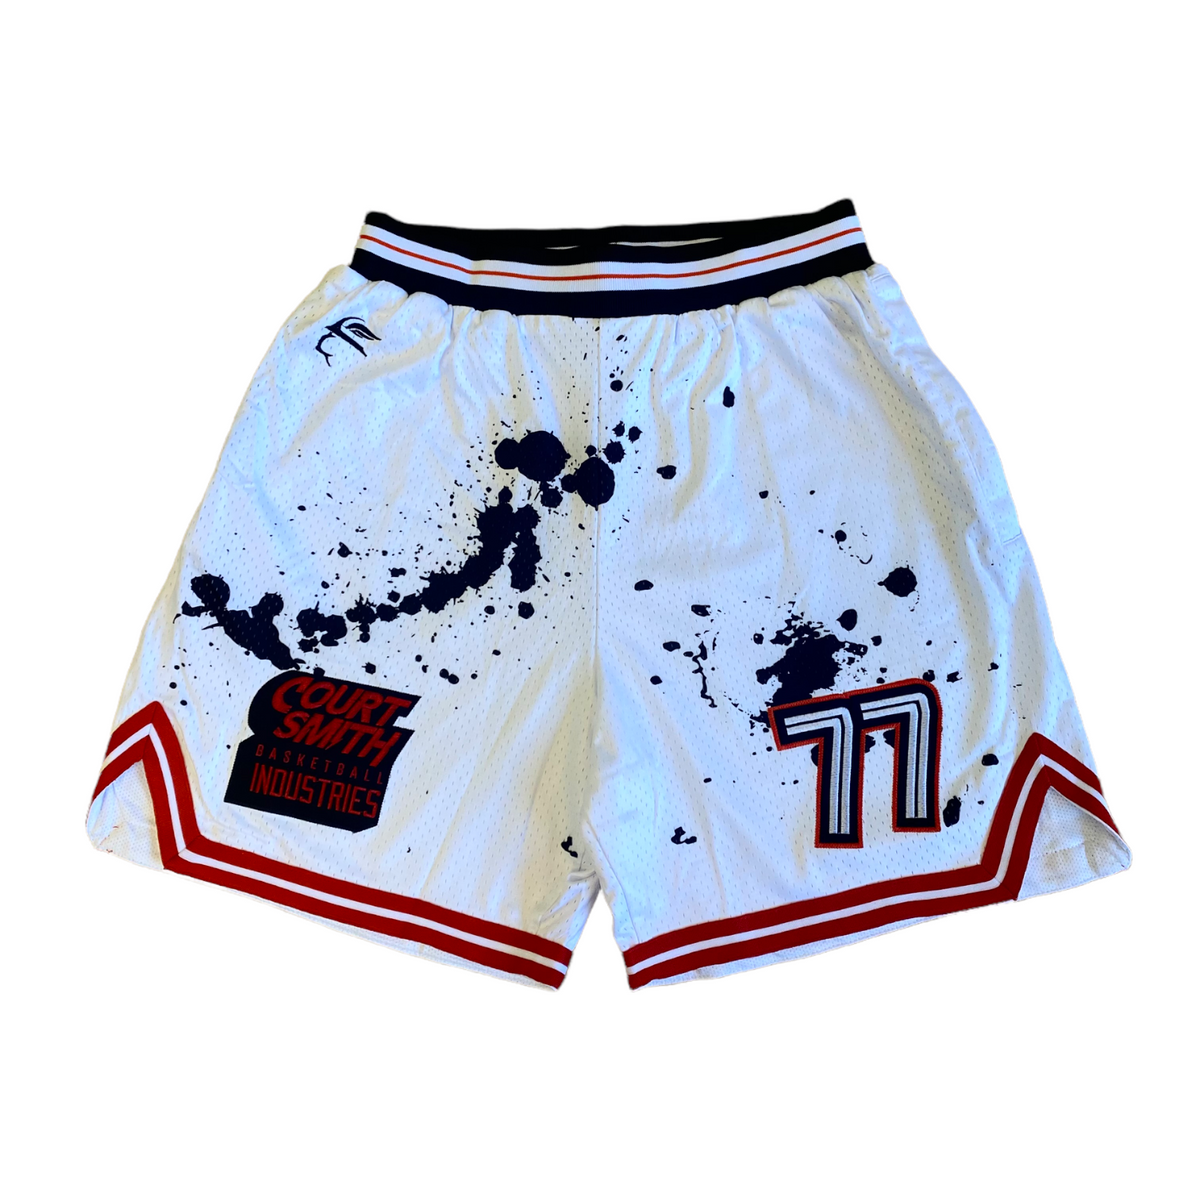 YOUTH OAKLAND WARRIORS SHORTS - Courtsmith